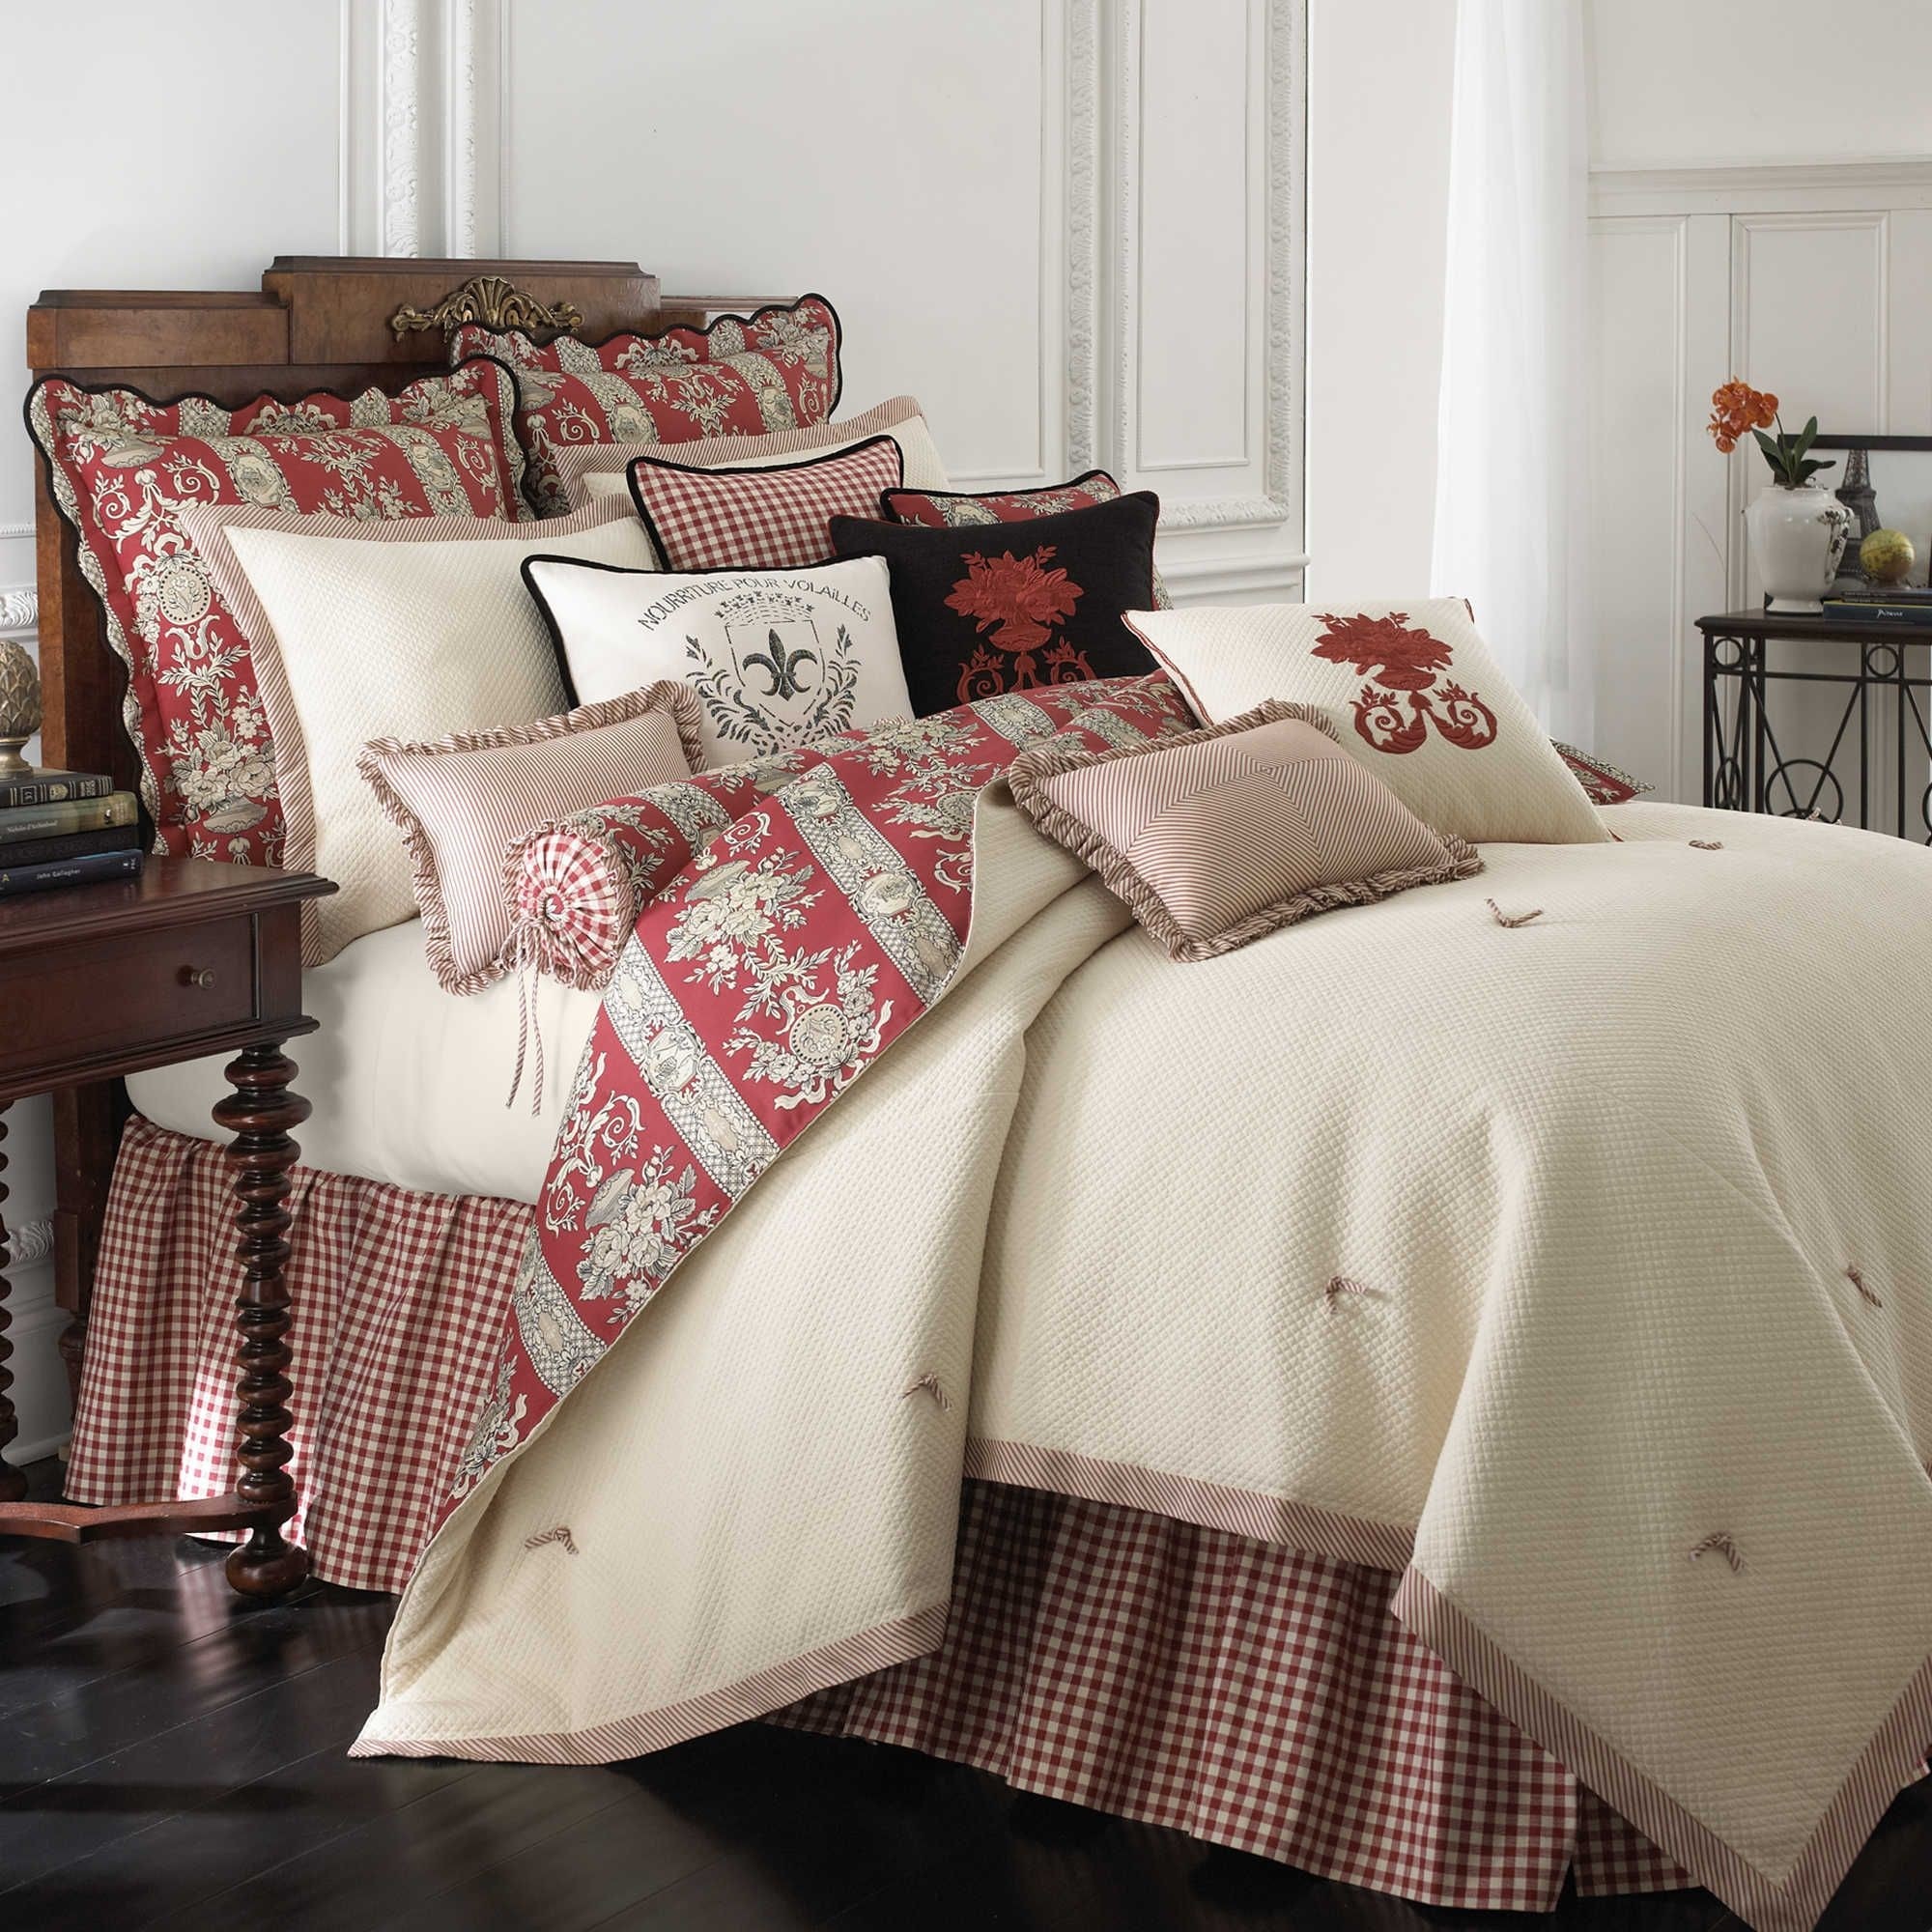 Check out other gallery of french country bedding sets